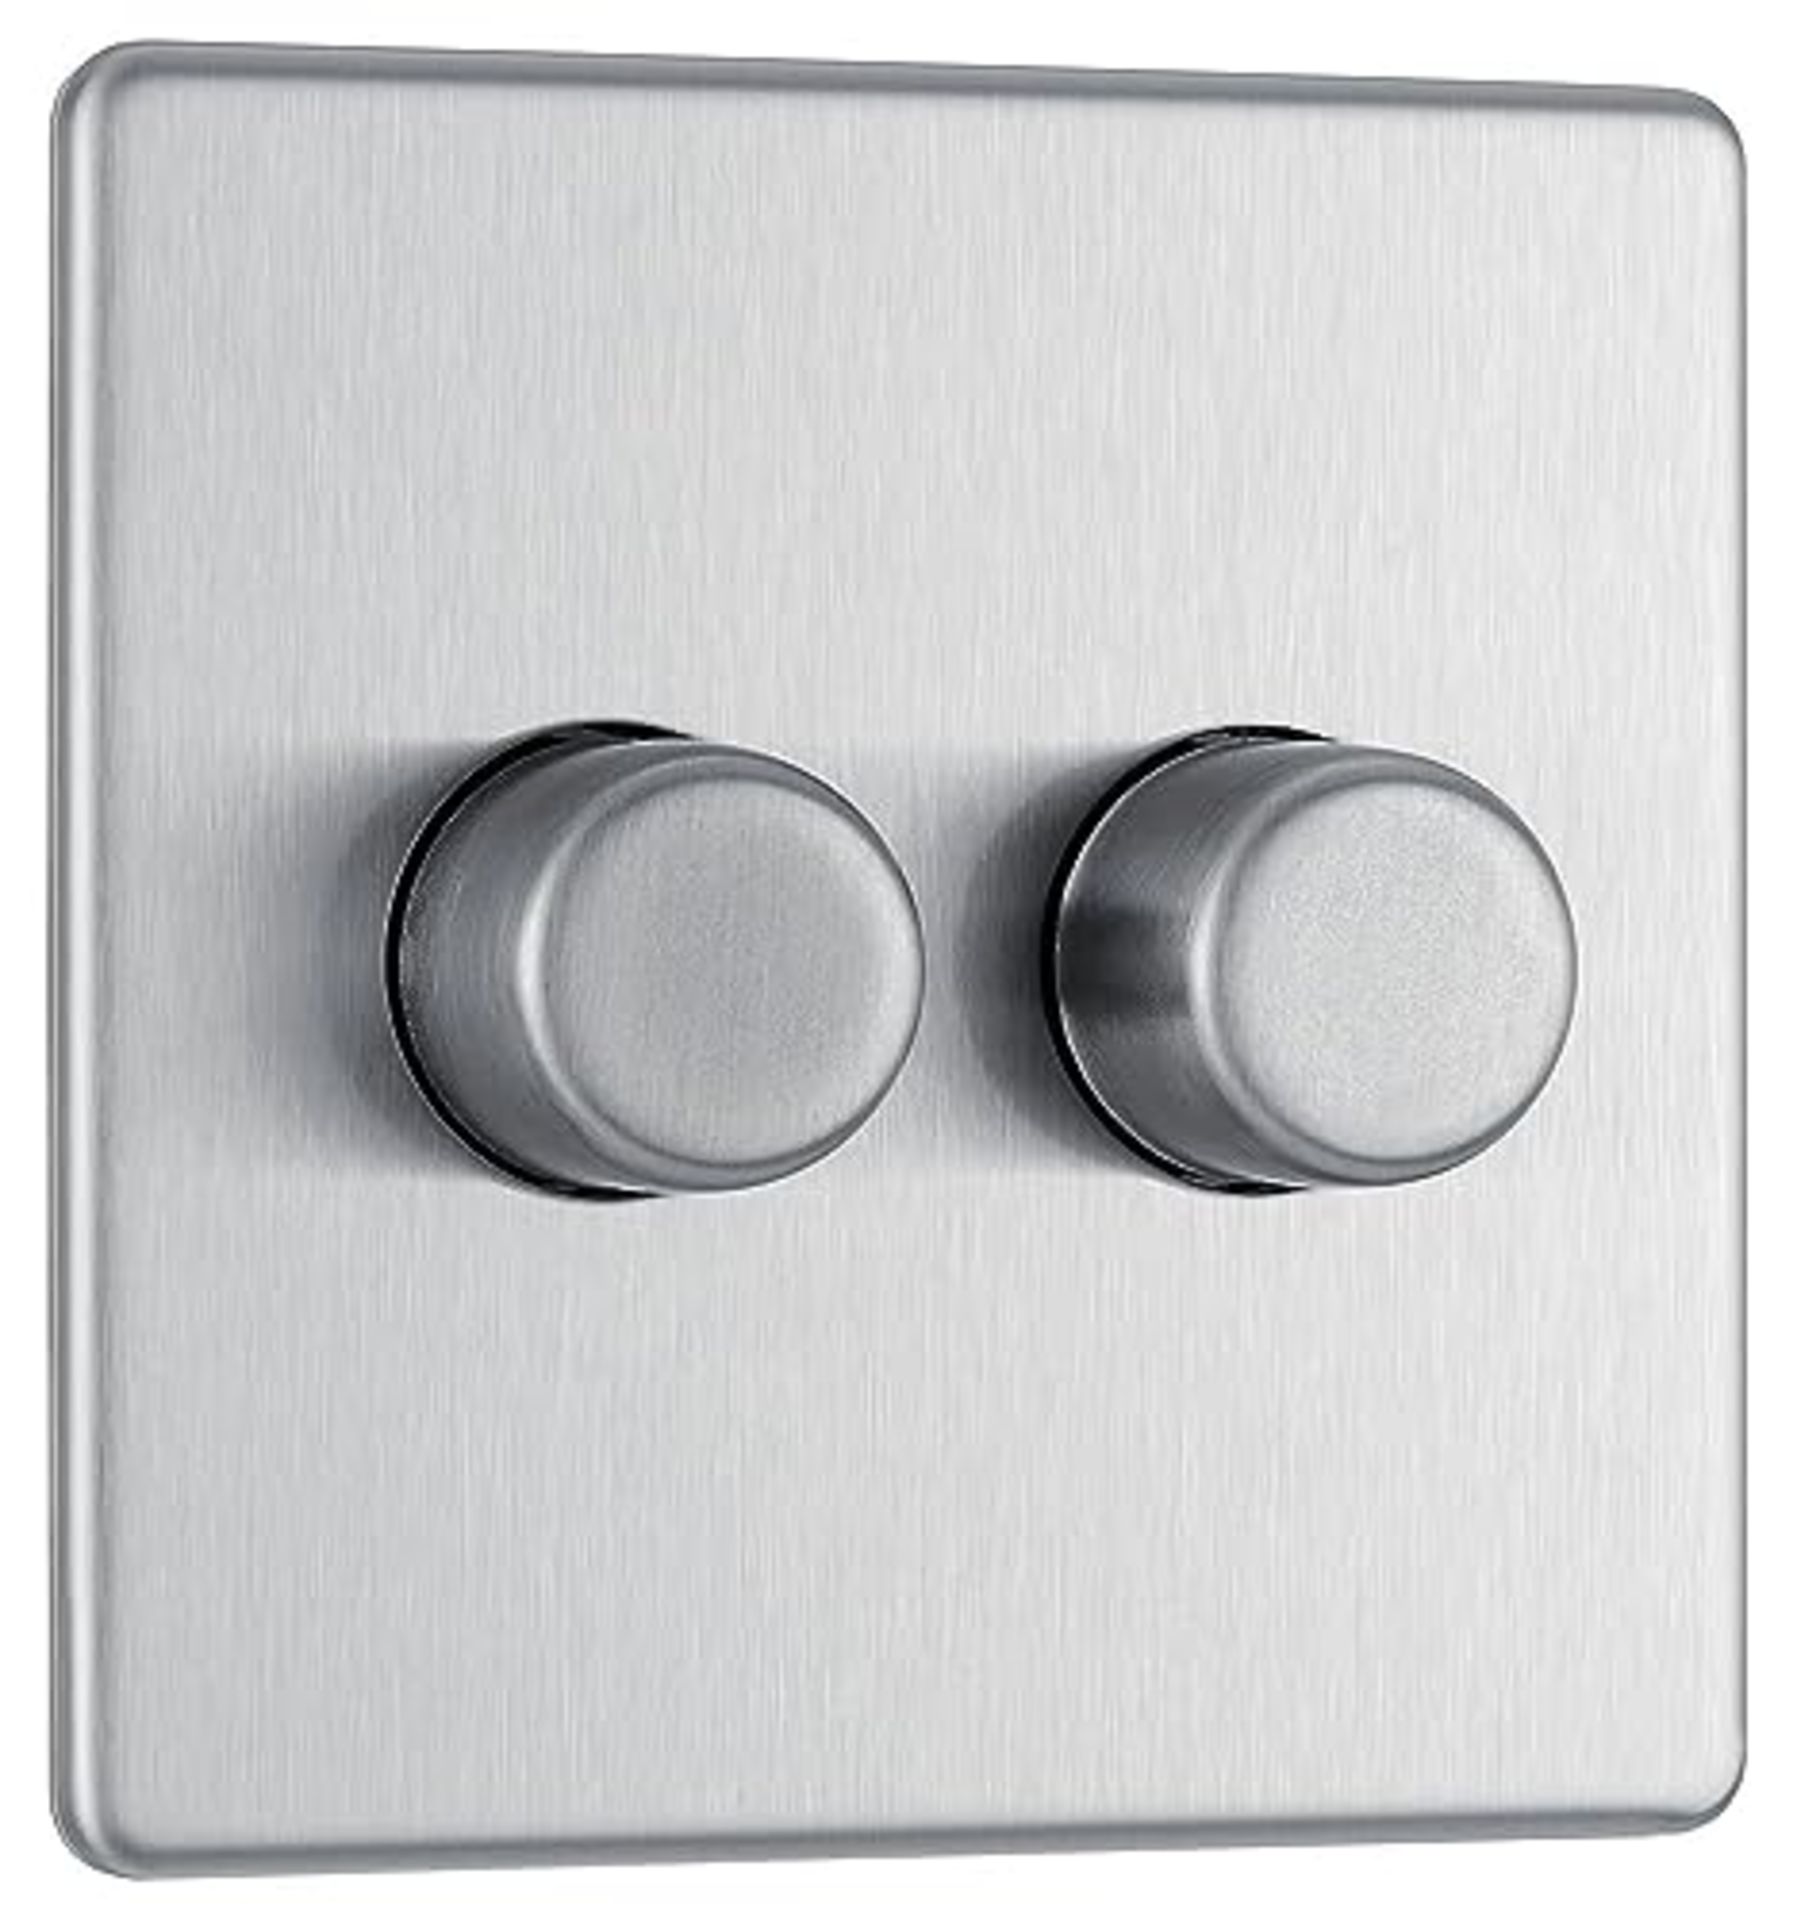 BG Electrical Screwless Flat Plate Double Dimmer Intelligent Light Switch, Brushed Ste